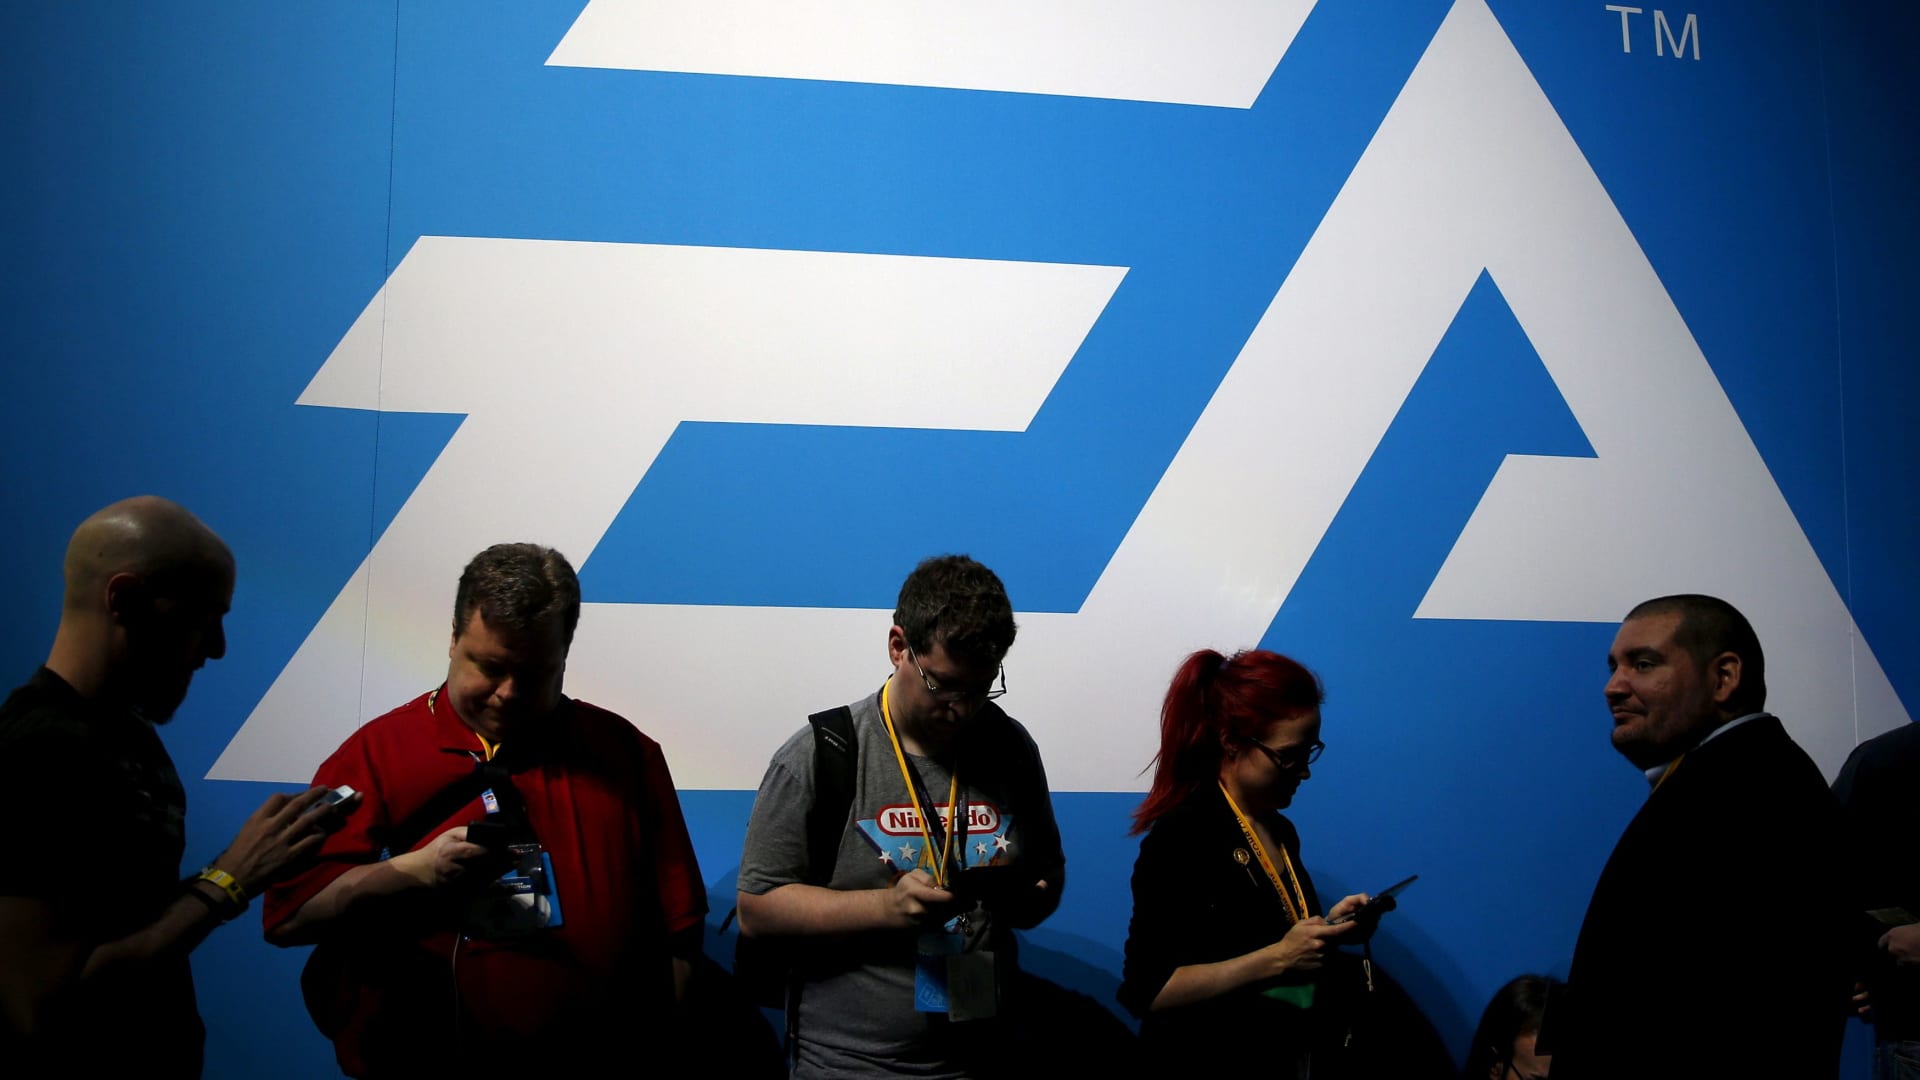 Electronic Arts is cutting about 800 jobs, or 6% of workforce, and reducing office space